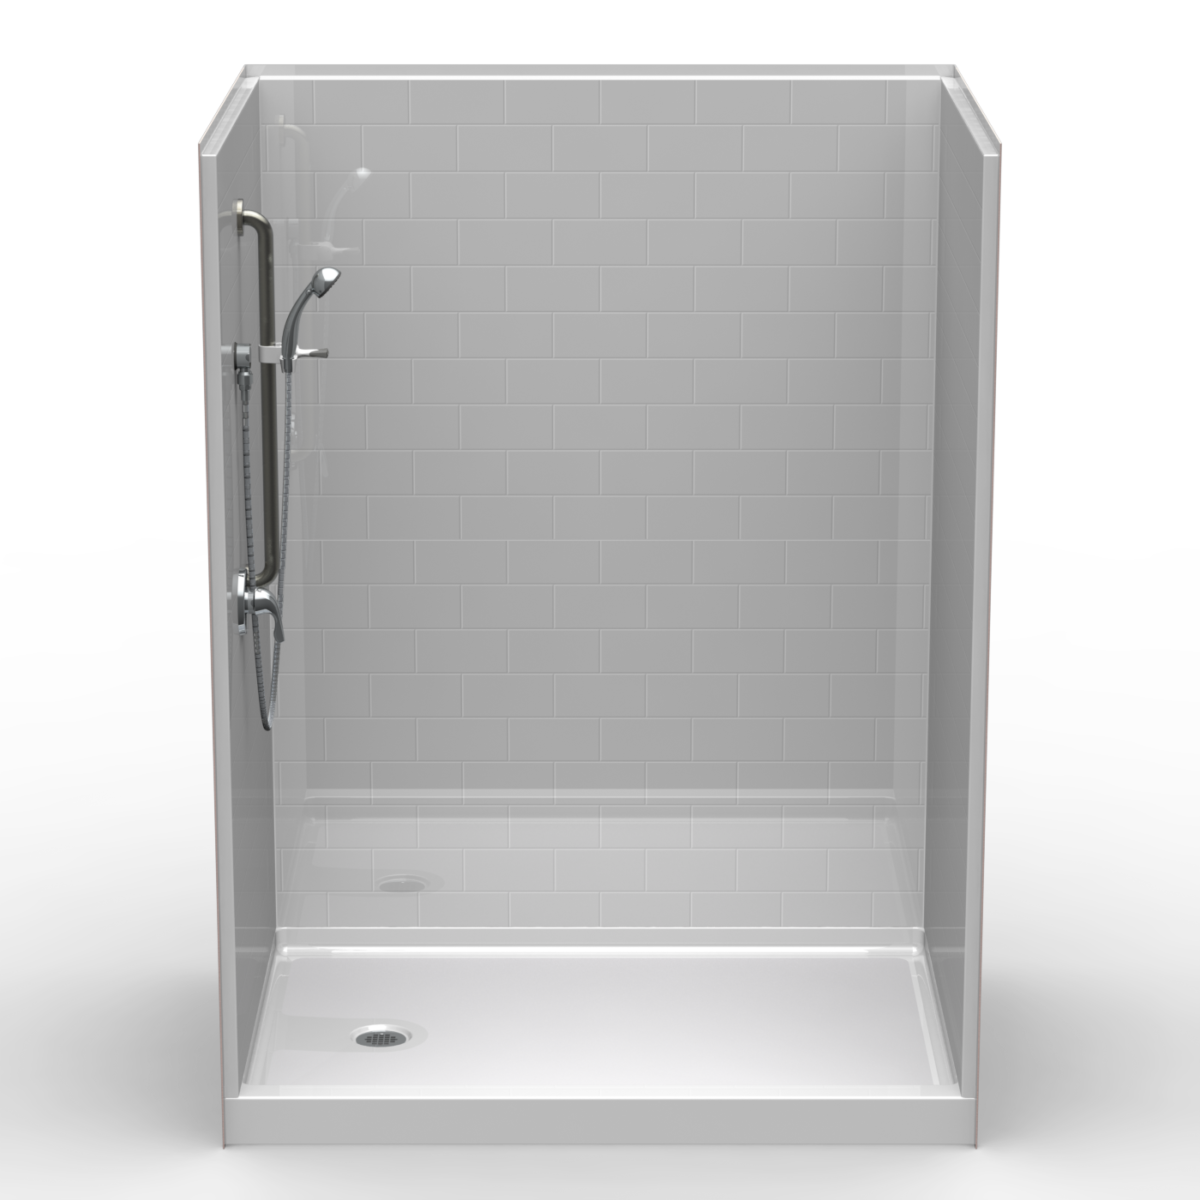 5LBS6042FB.V2L/R, Five Piece 60” x 42” Curbed Shower, 4” Threshold, End Drain, “Subway Tile”